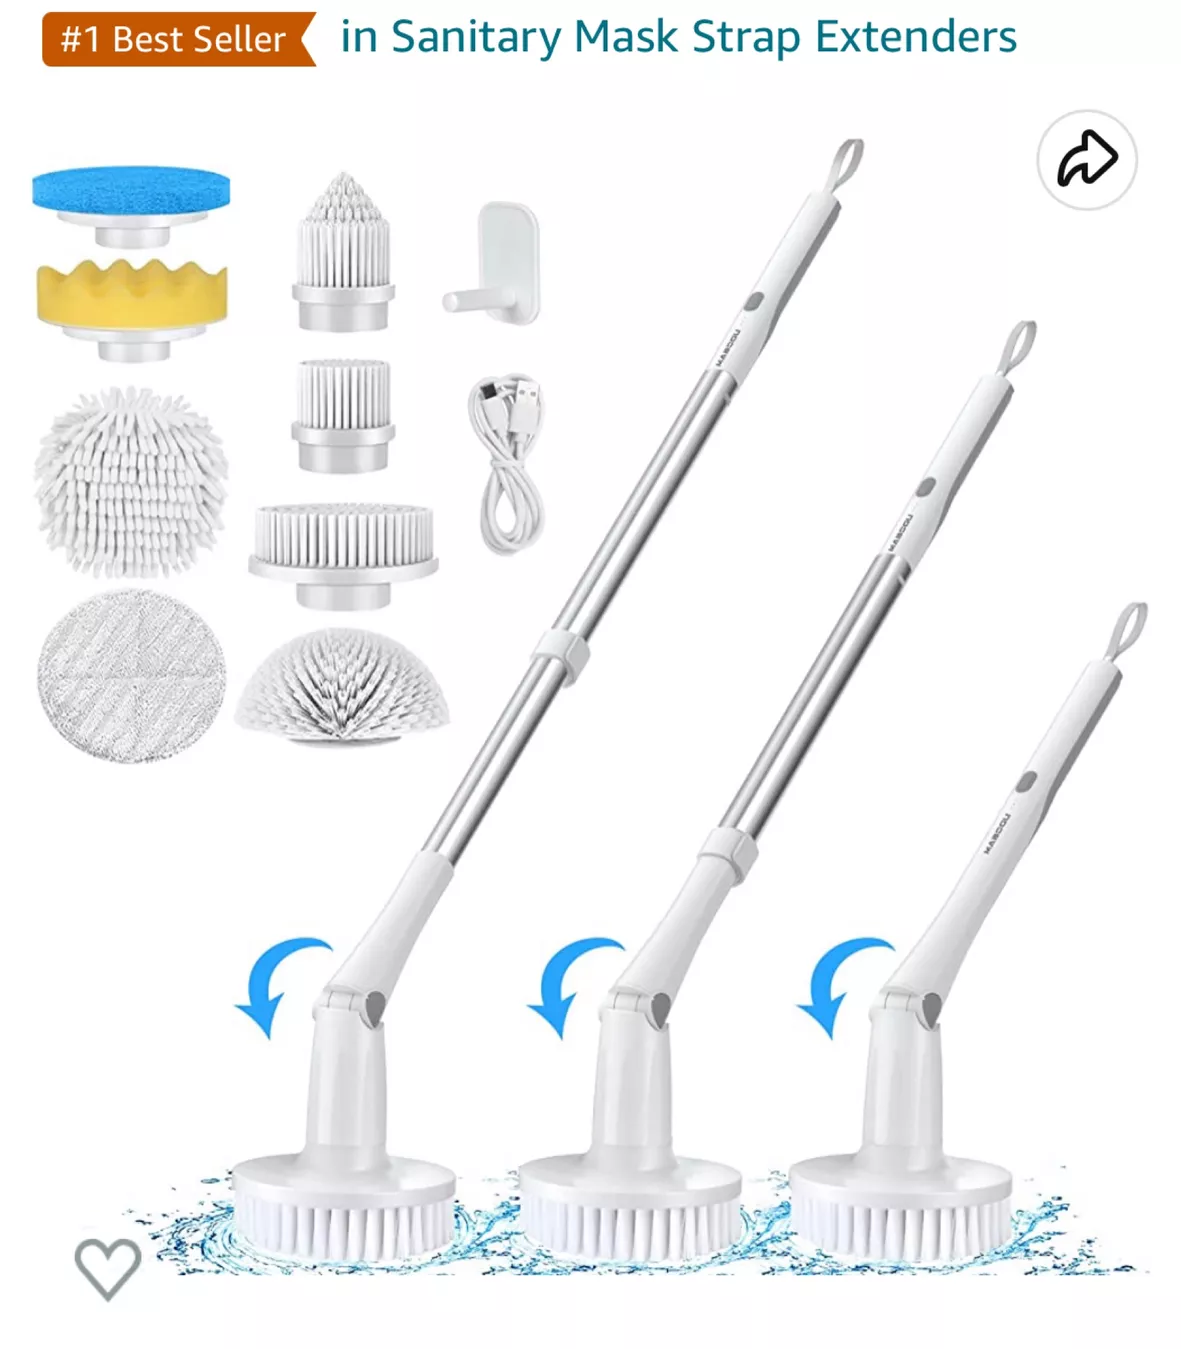 Electric Spin Scrubber, Cordless Cleaning Brush with 8 Replaceable